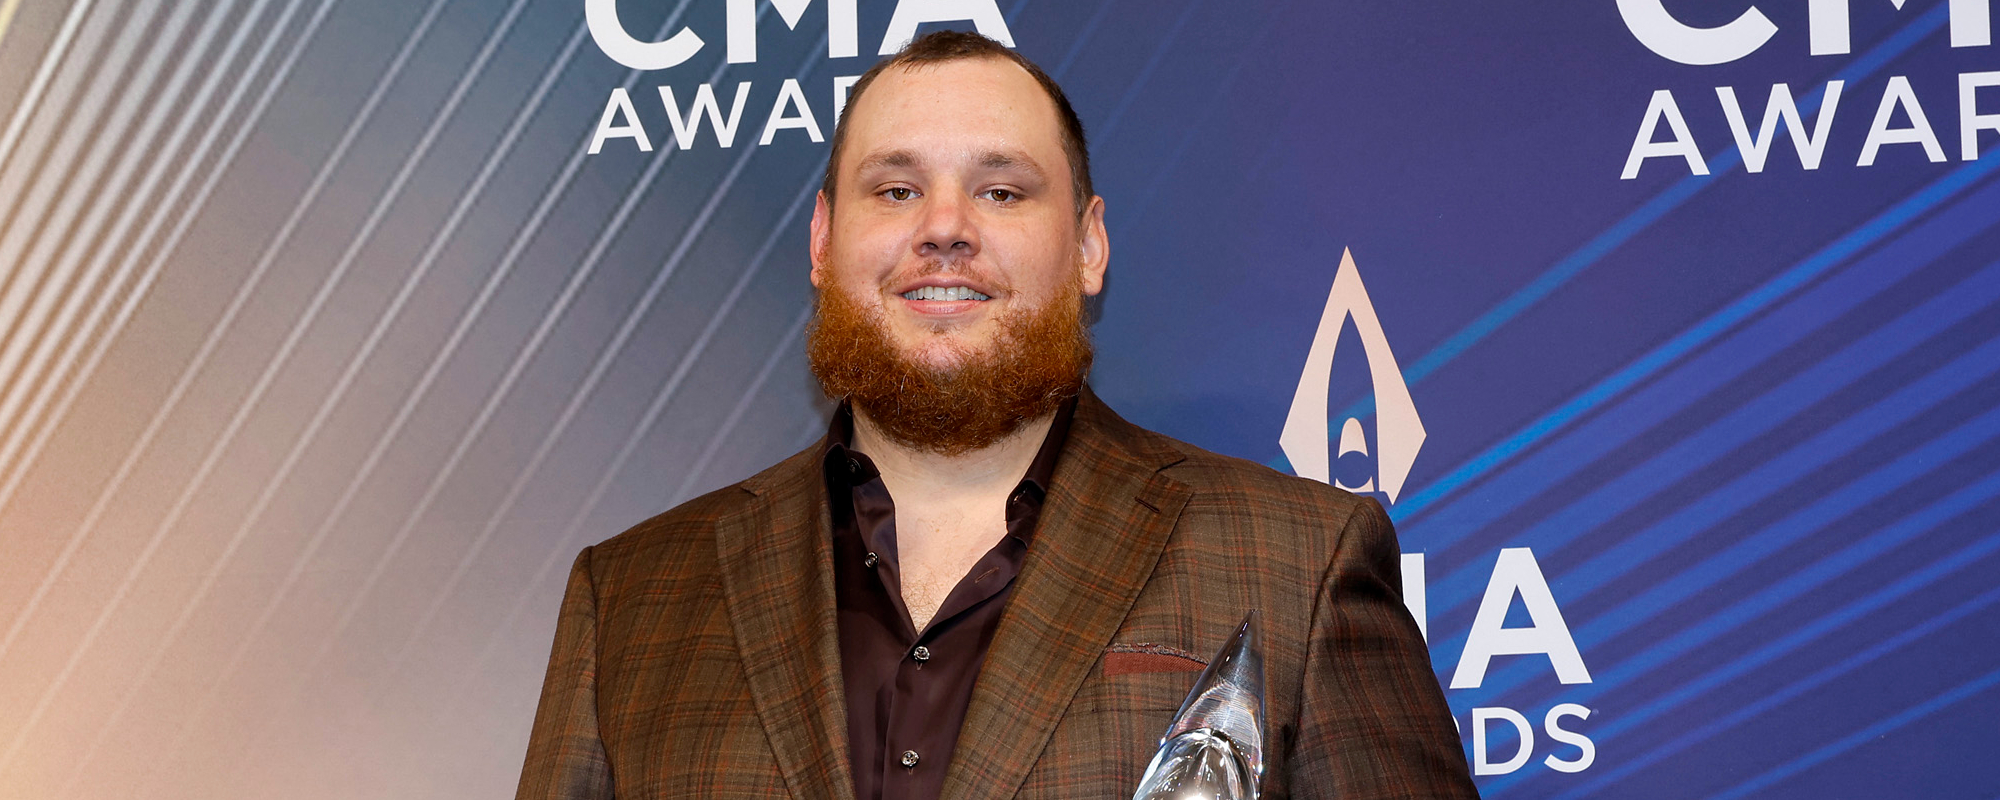 Luke Combs Shares Exciting News About the 66th Annual Grammy Awards